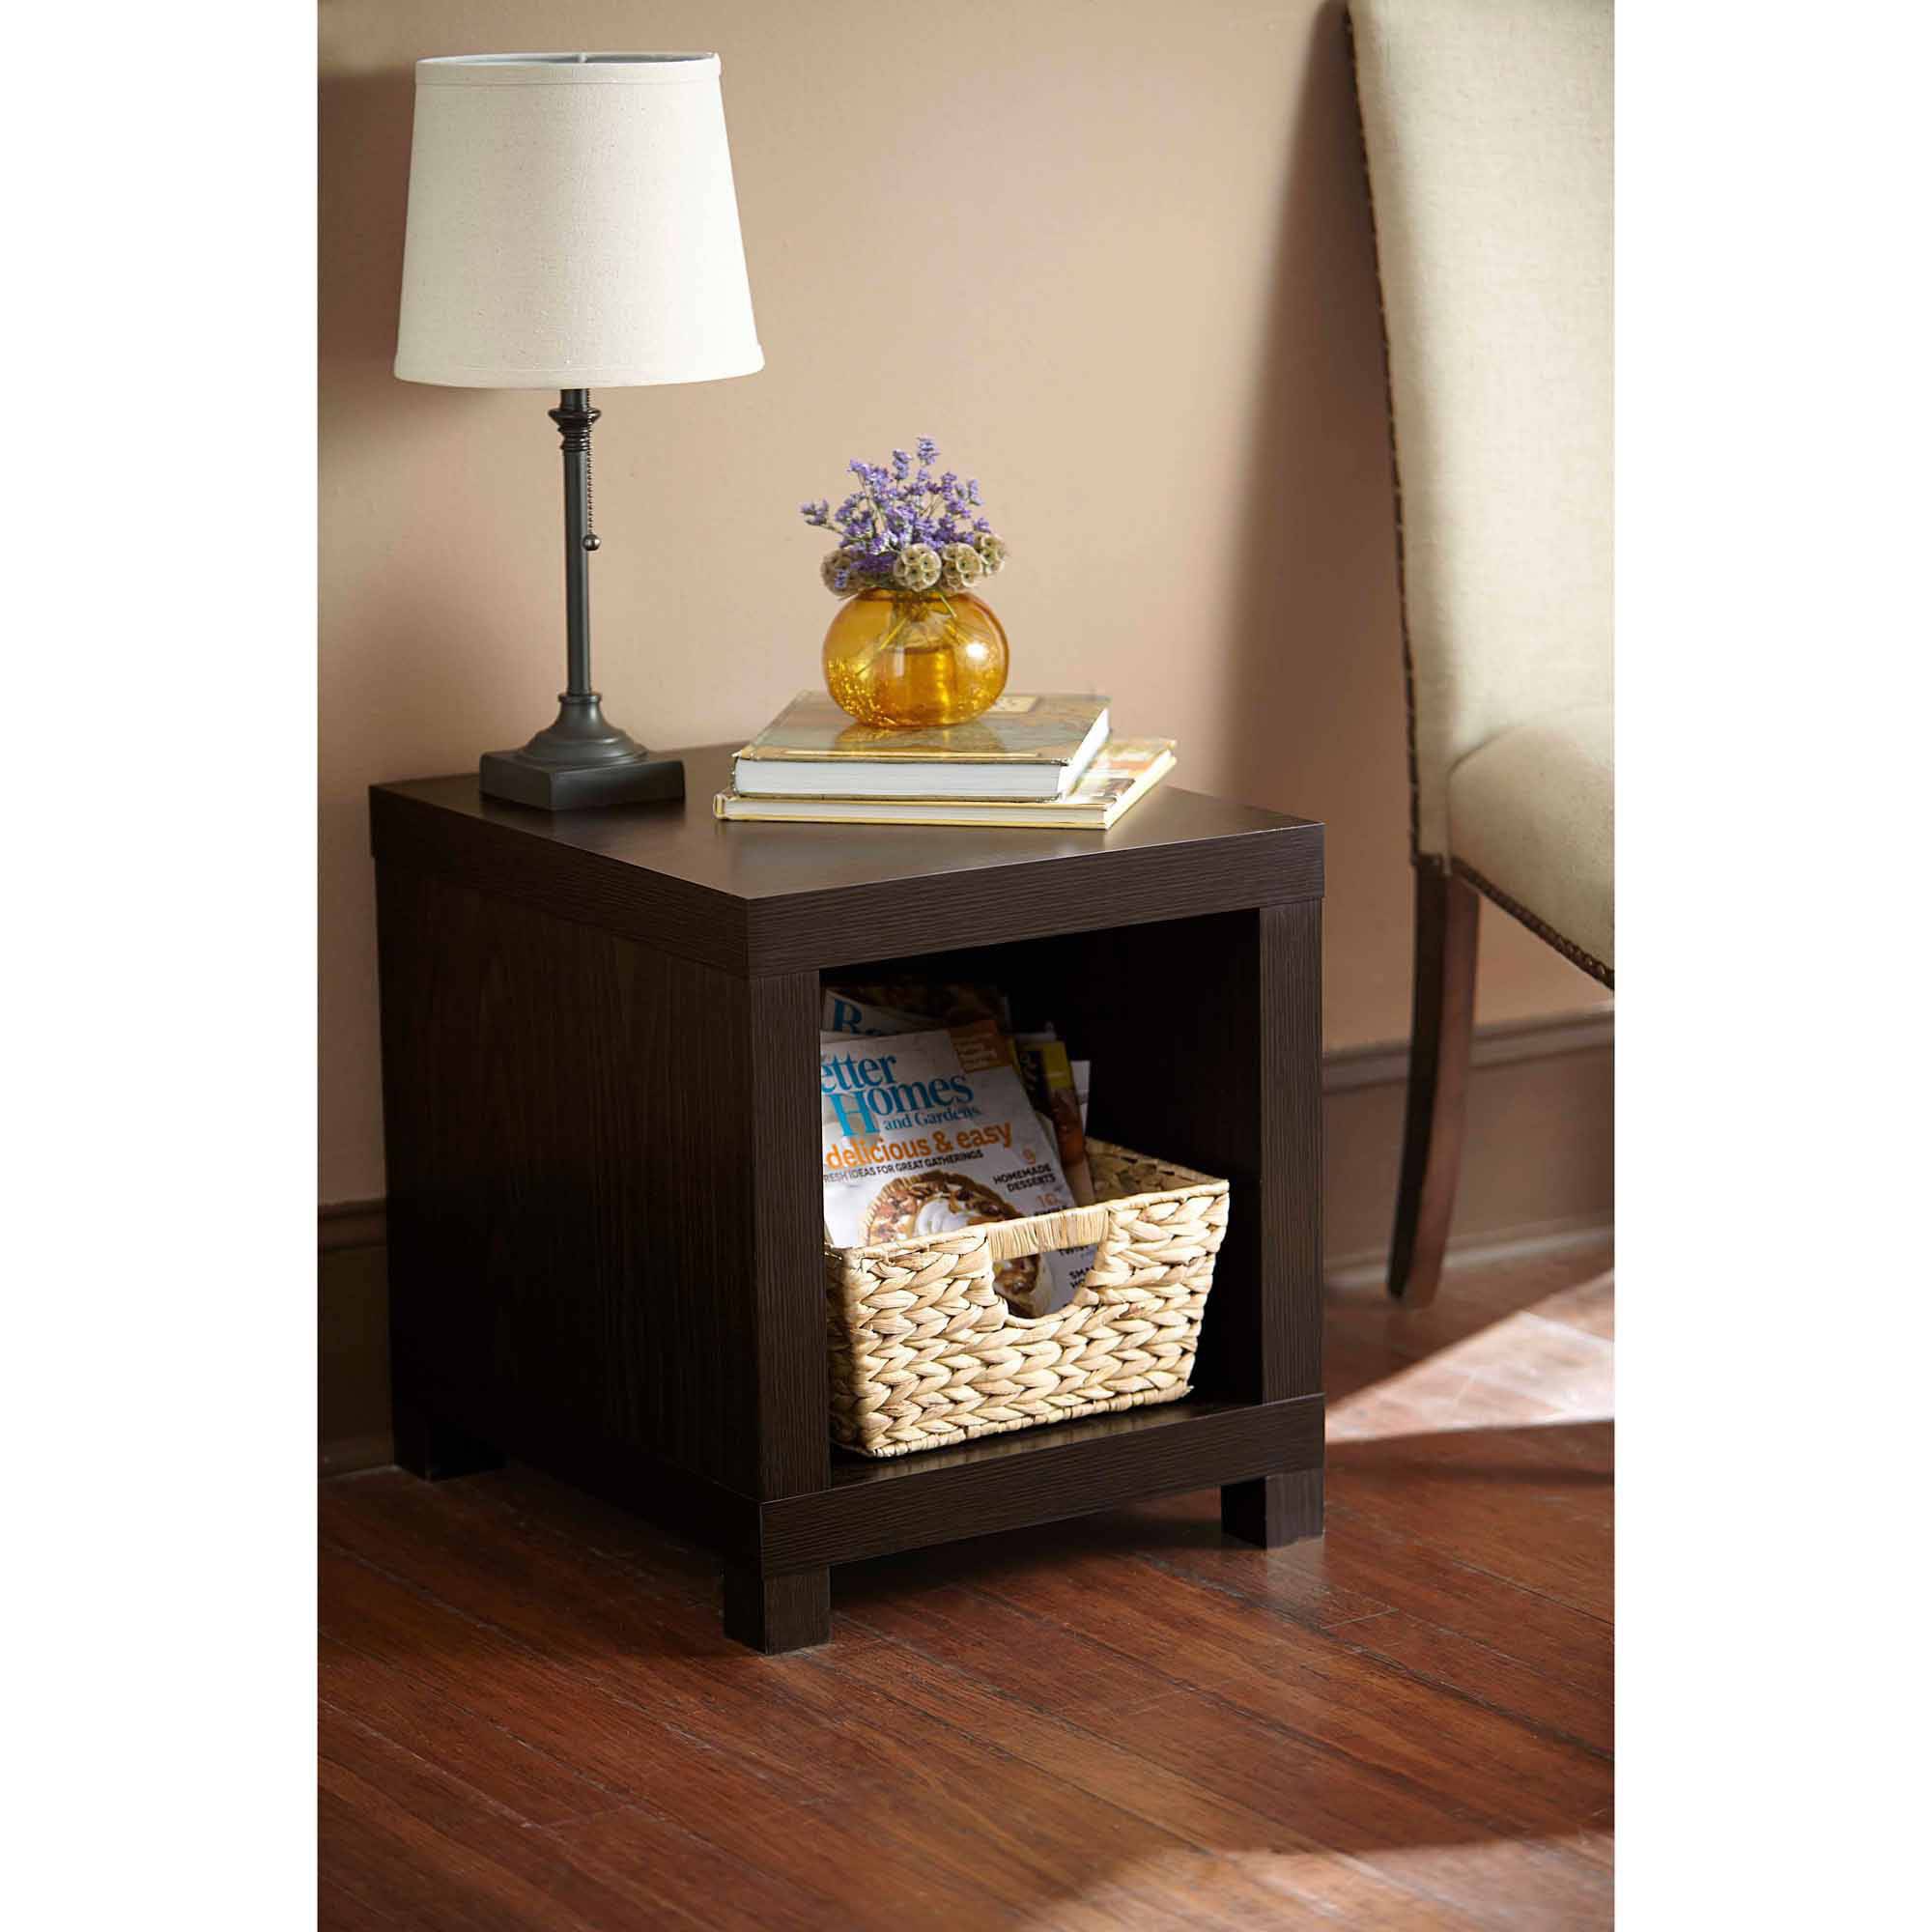 Better Homes & Gardens Accent Table, Espresso - image 4 of 5